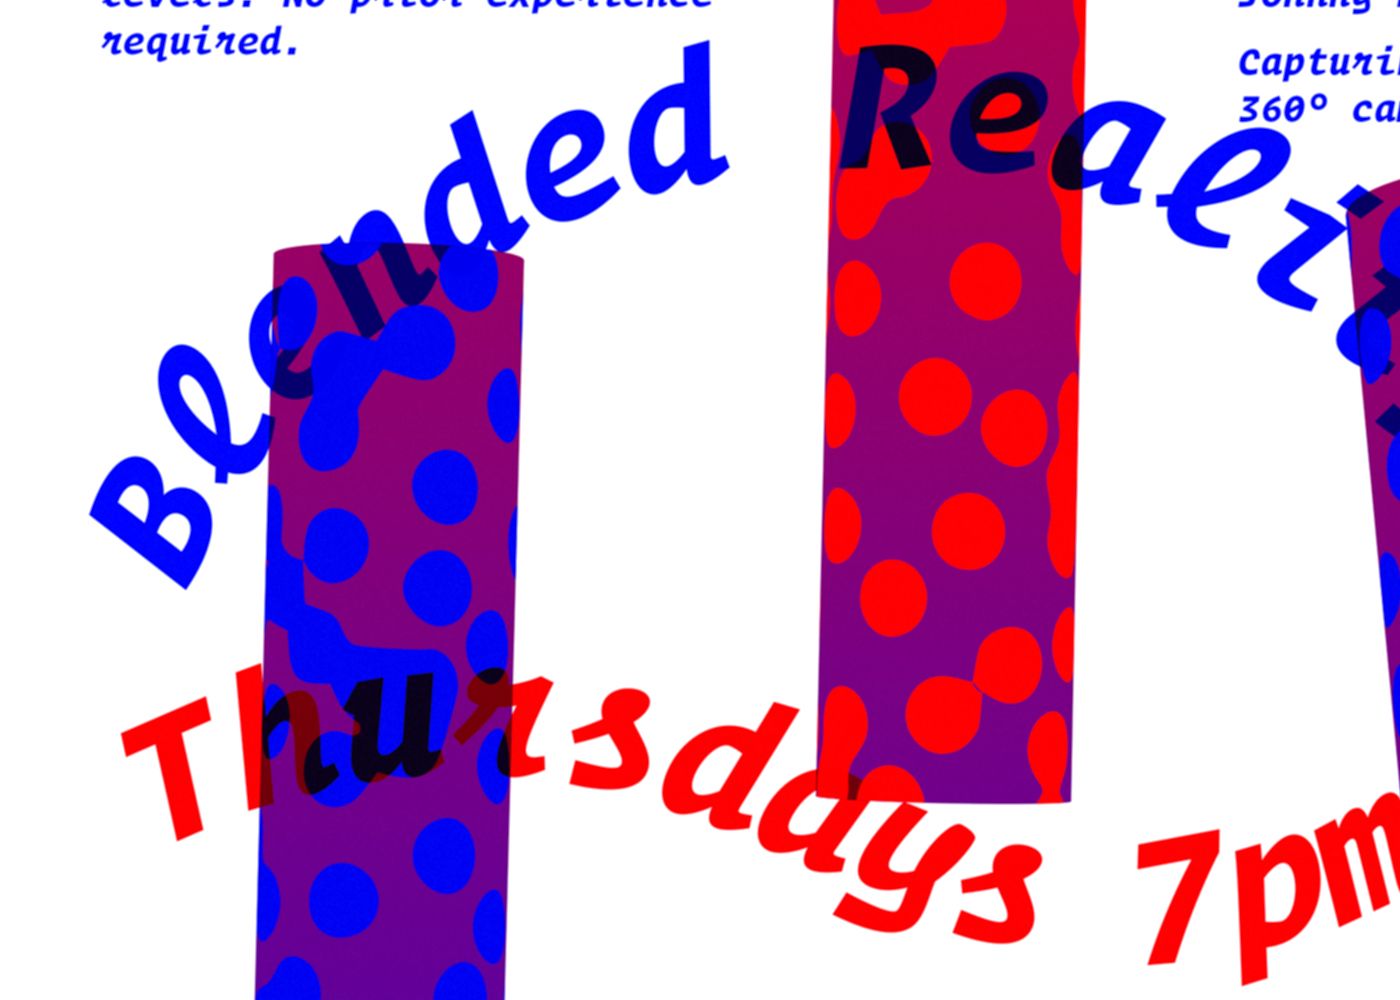 Detail of Blended Reality Workshops schedule poster with 3D red and blue bars.